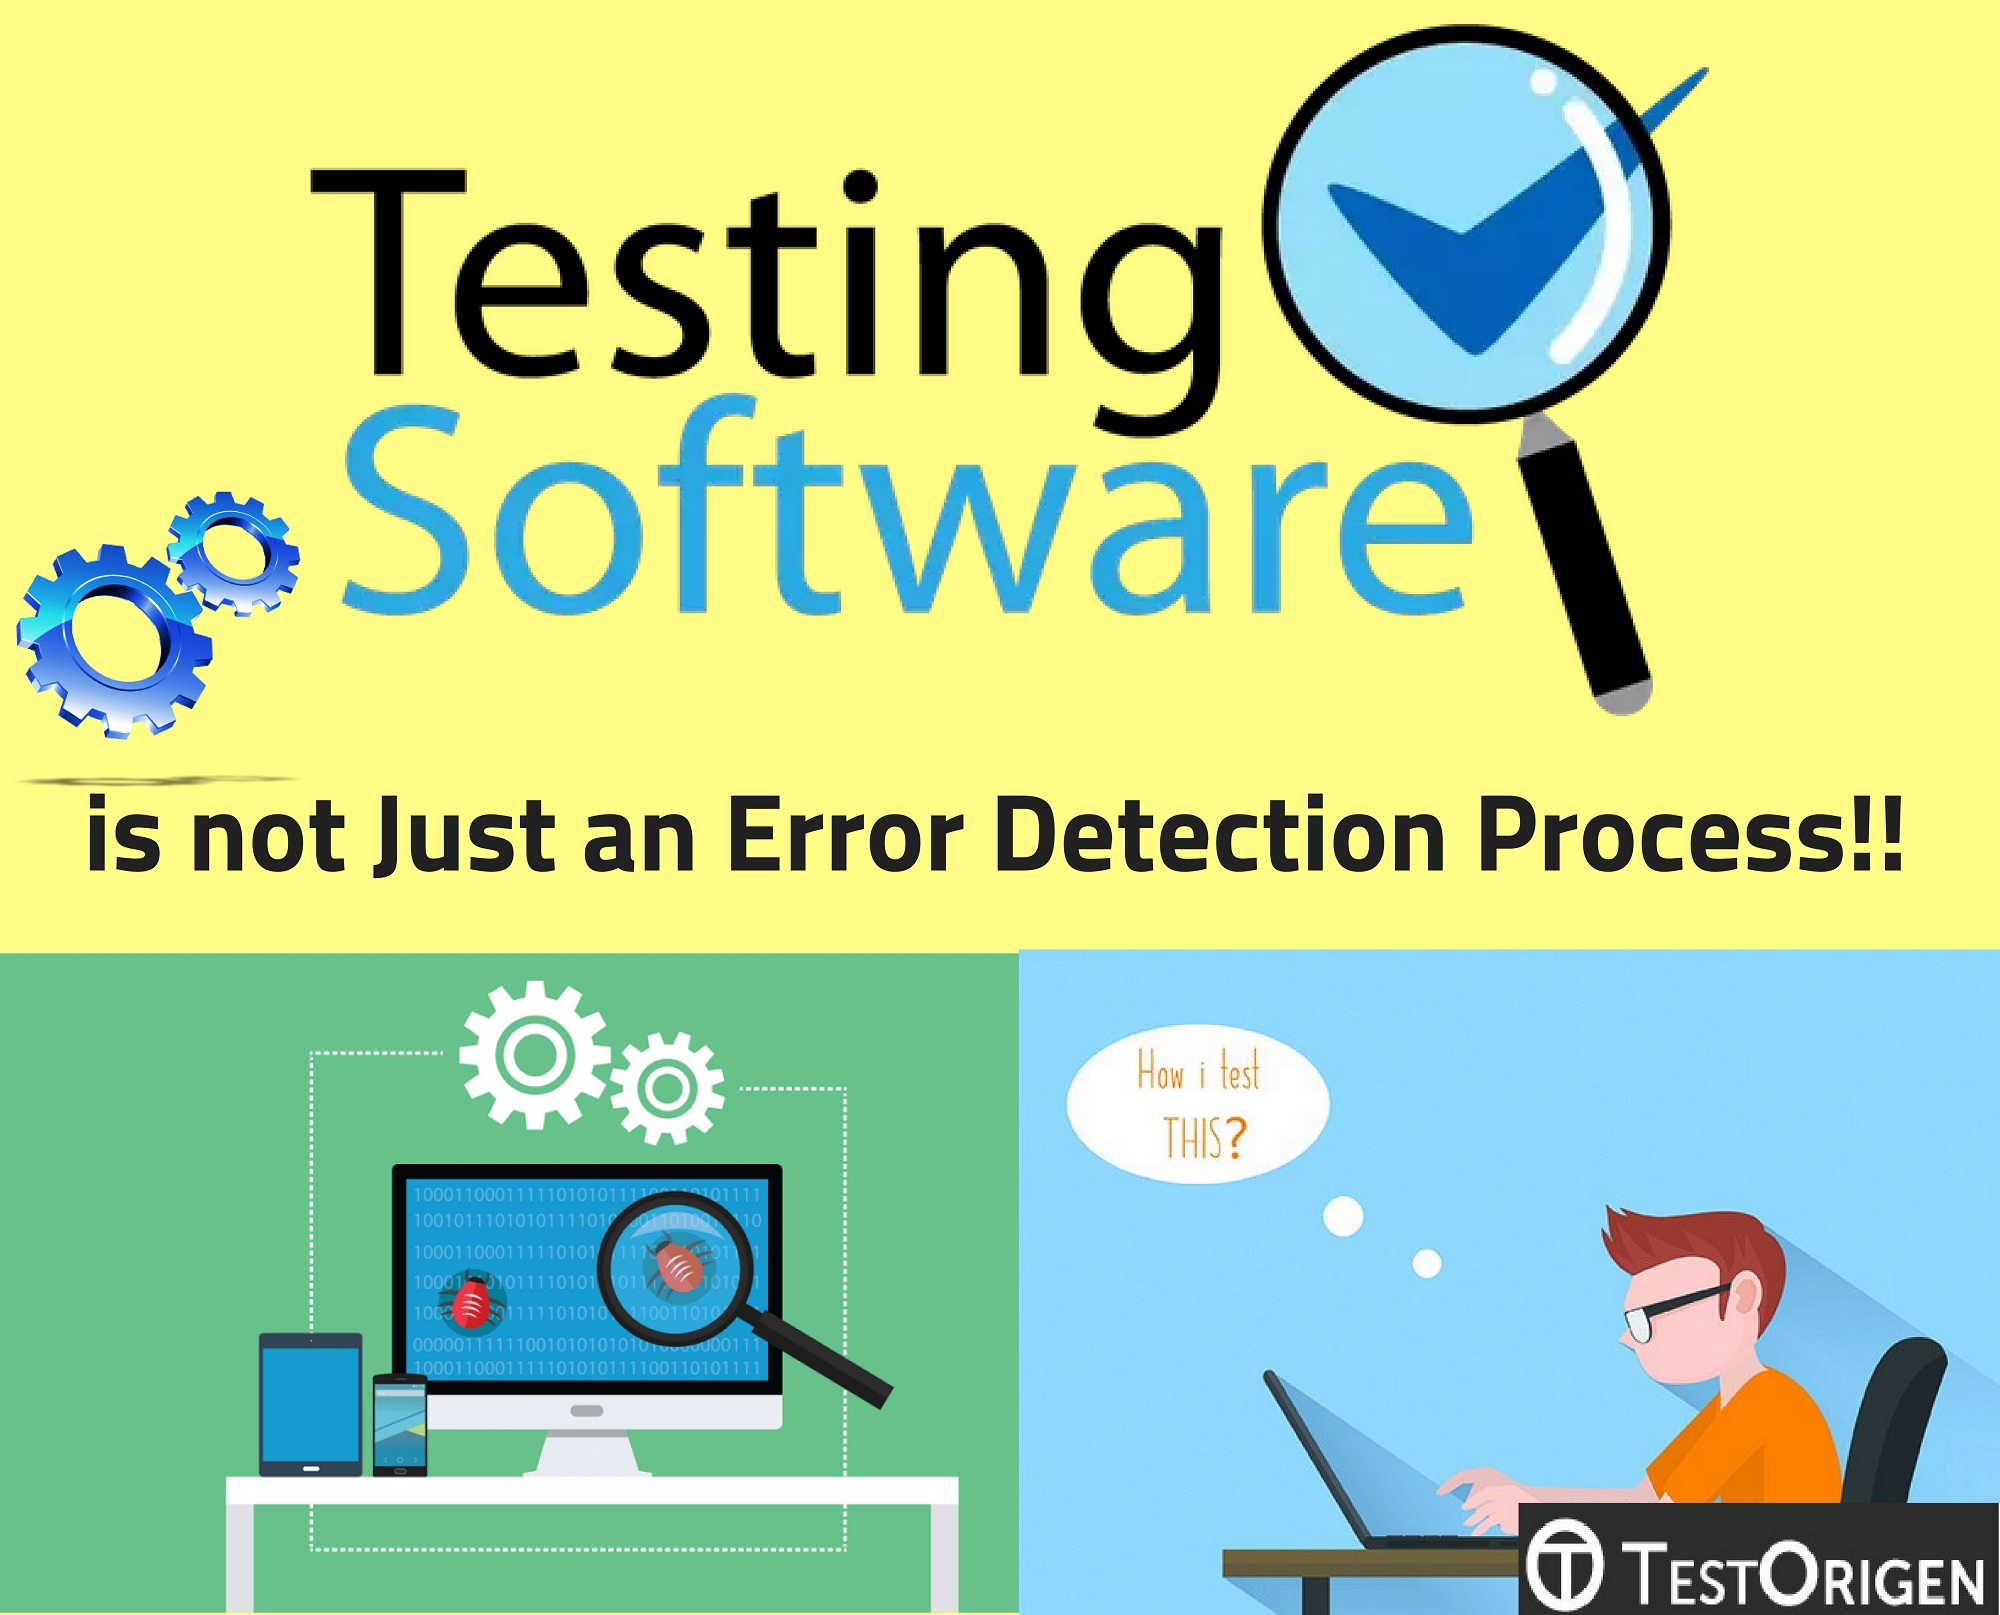 Software Testing is not Just an Error Detection Process. software testing processes and methodologies